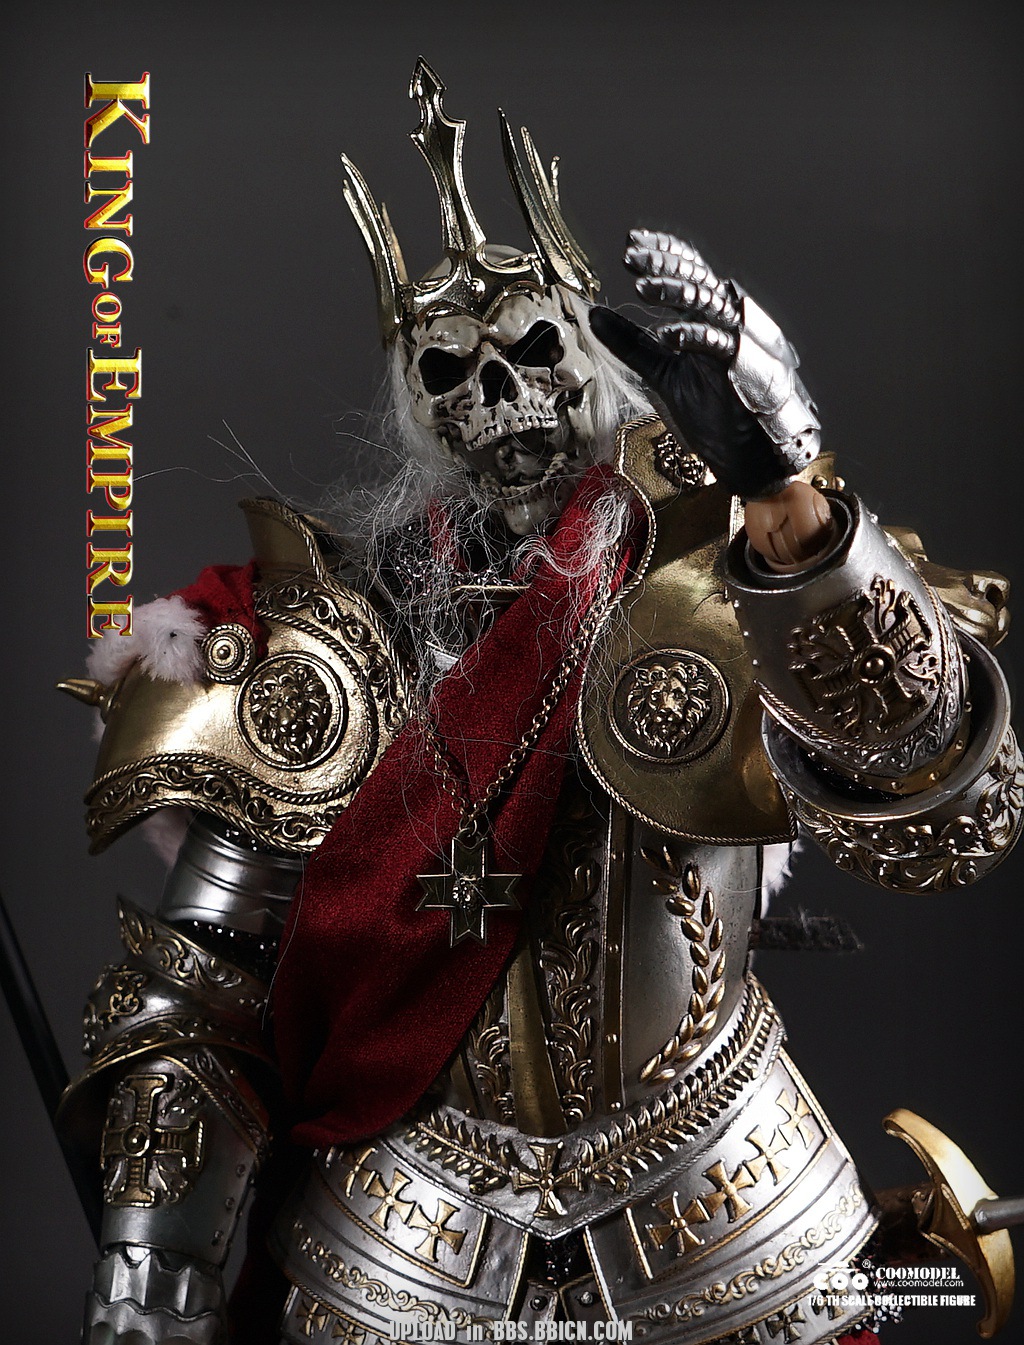 NightmareSeries - NEW PRODUCT: COOMODEL: 1/6 Nightmare Series-King of the Empire, Bishop of the Empire-Alloy Standard Edition/Pure Copper Collector's Edition NS016/7/8/9 23030810